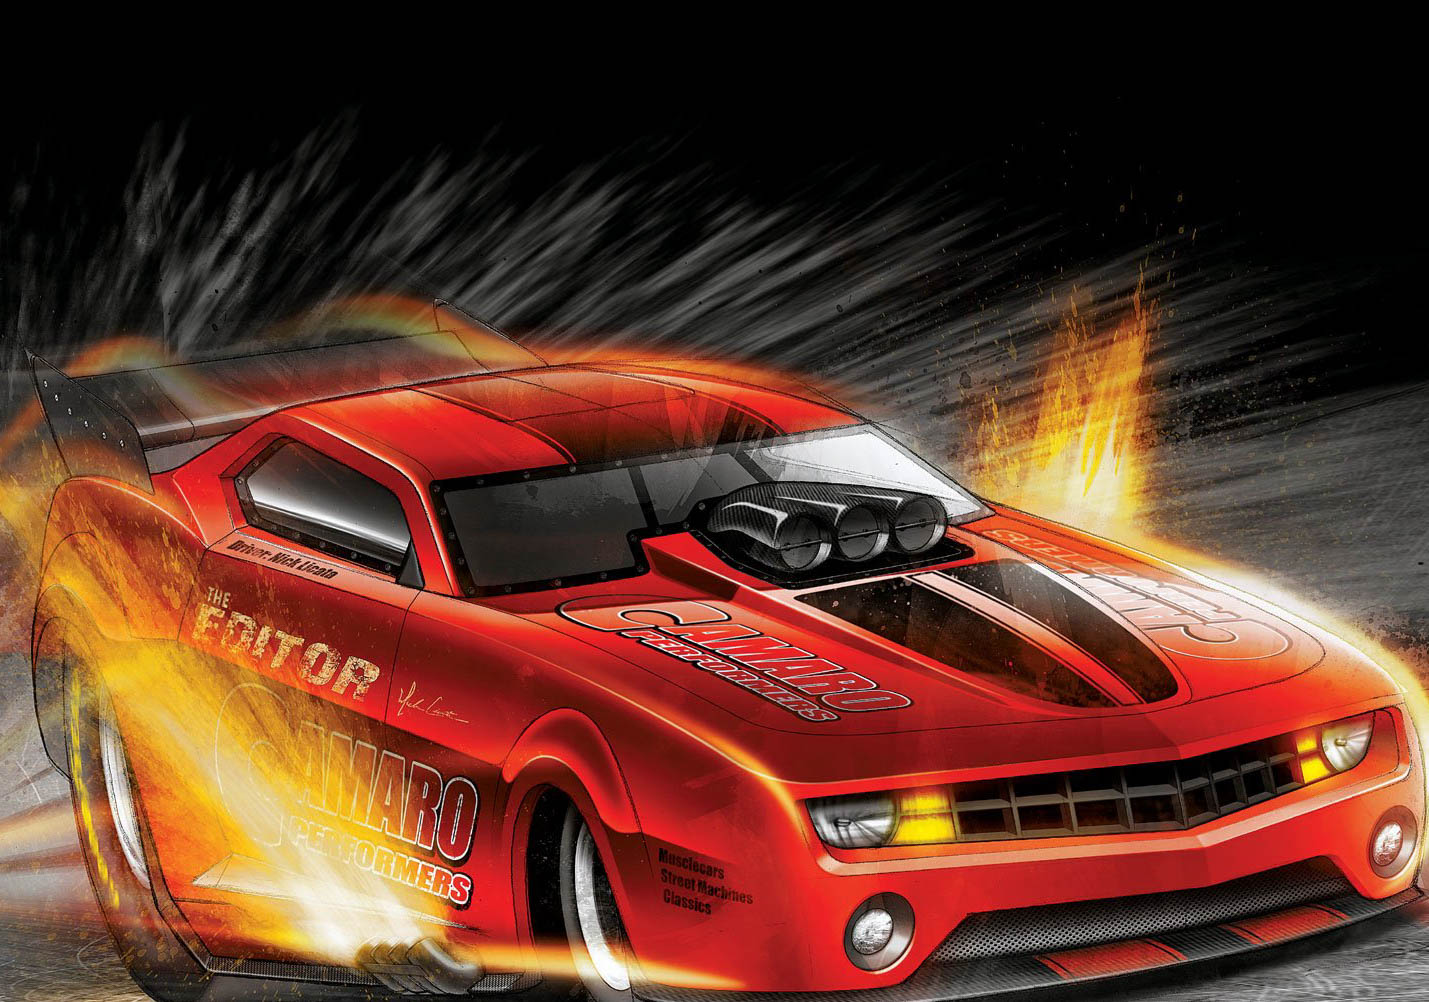 Funny Car Wallpaper Amp Image In High Quality All HD